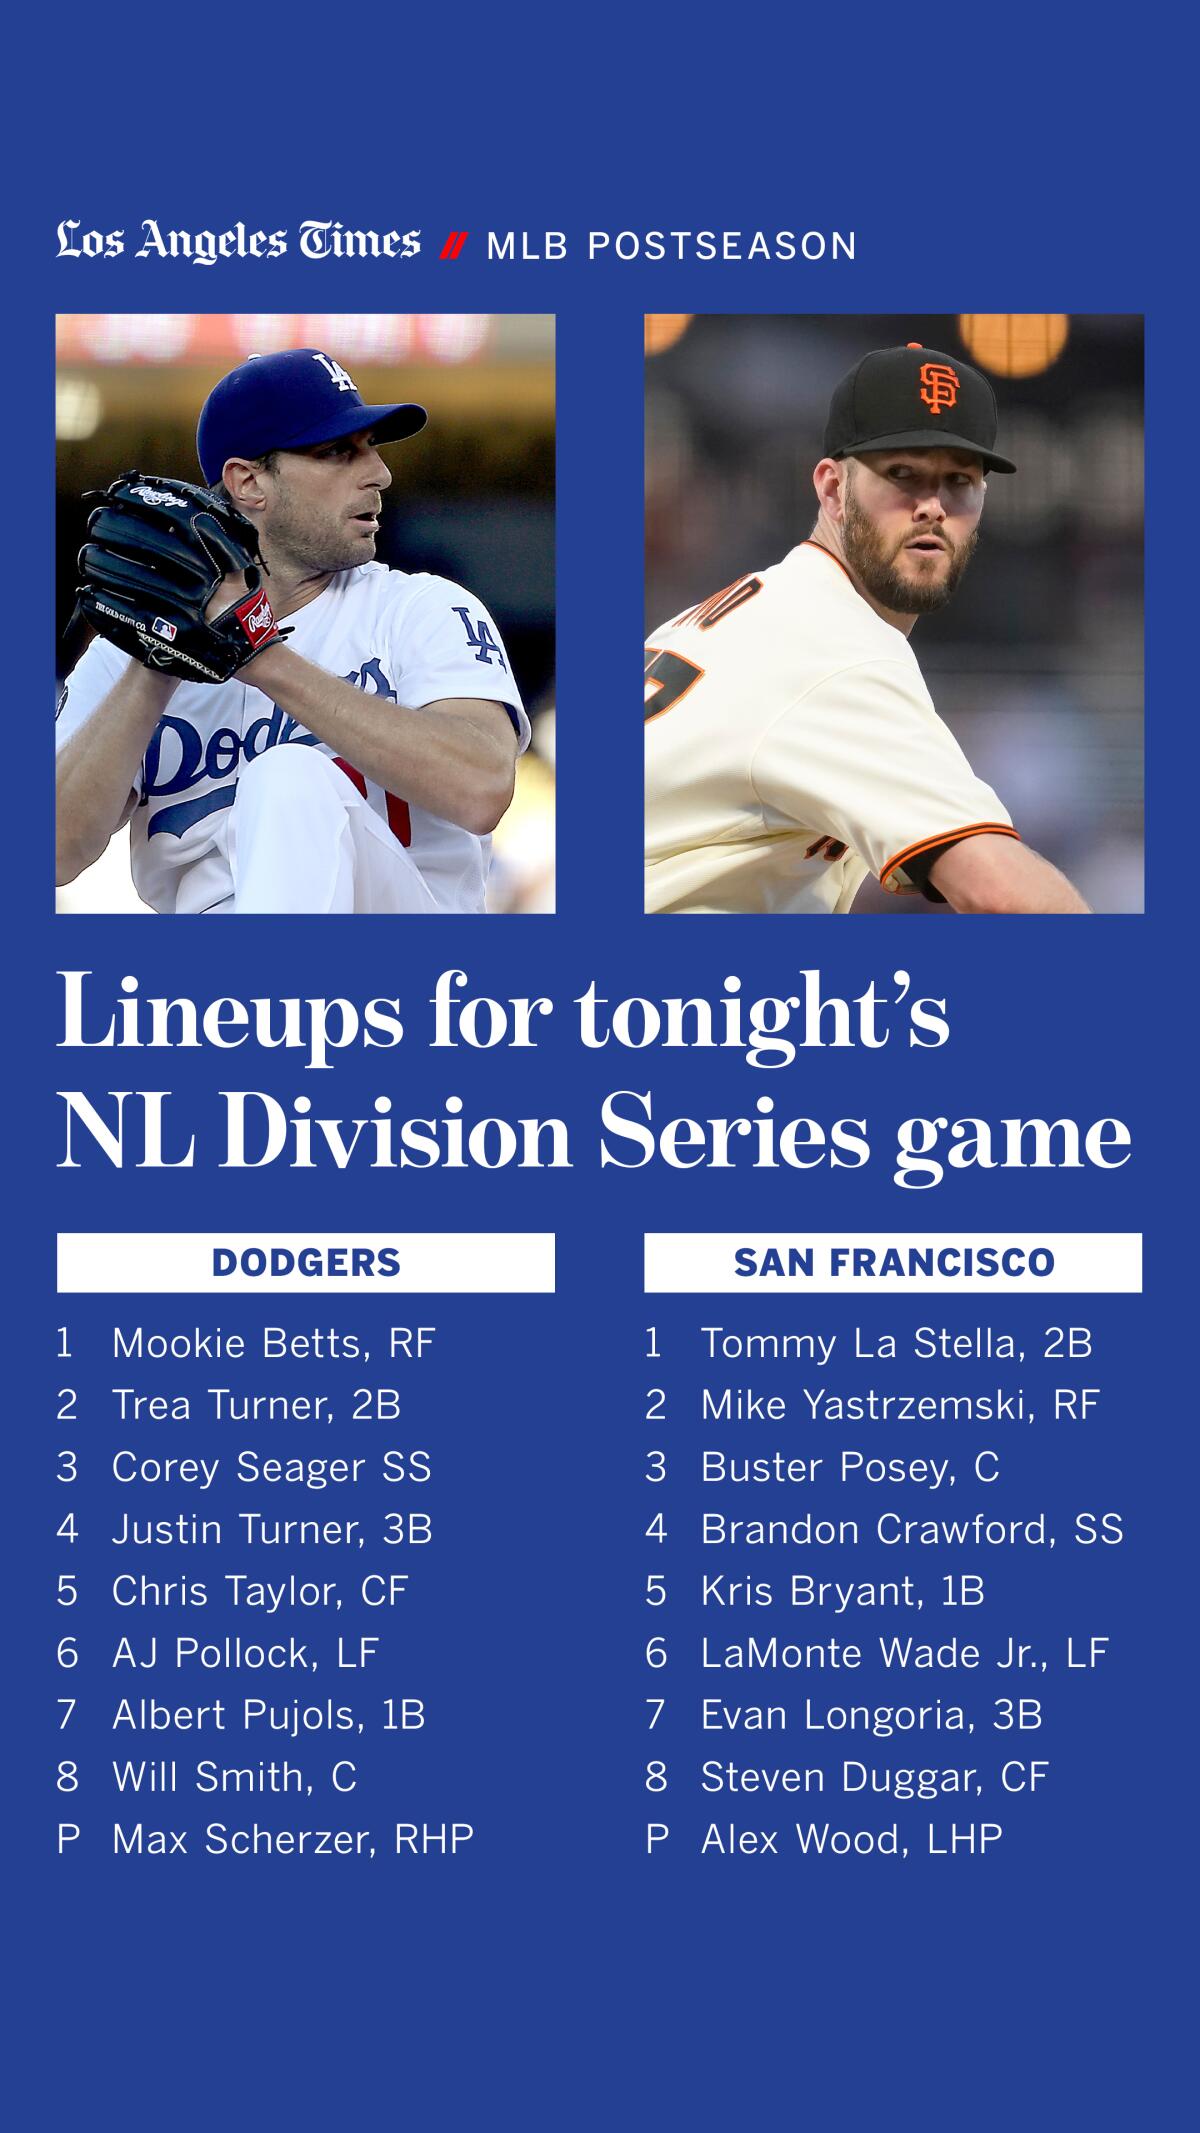 Starting lineups for the Dodgers and Giants for Game 3 of the 2021 NLDS.